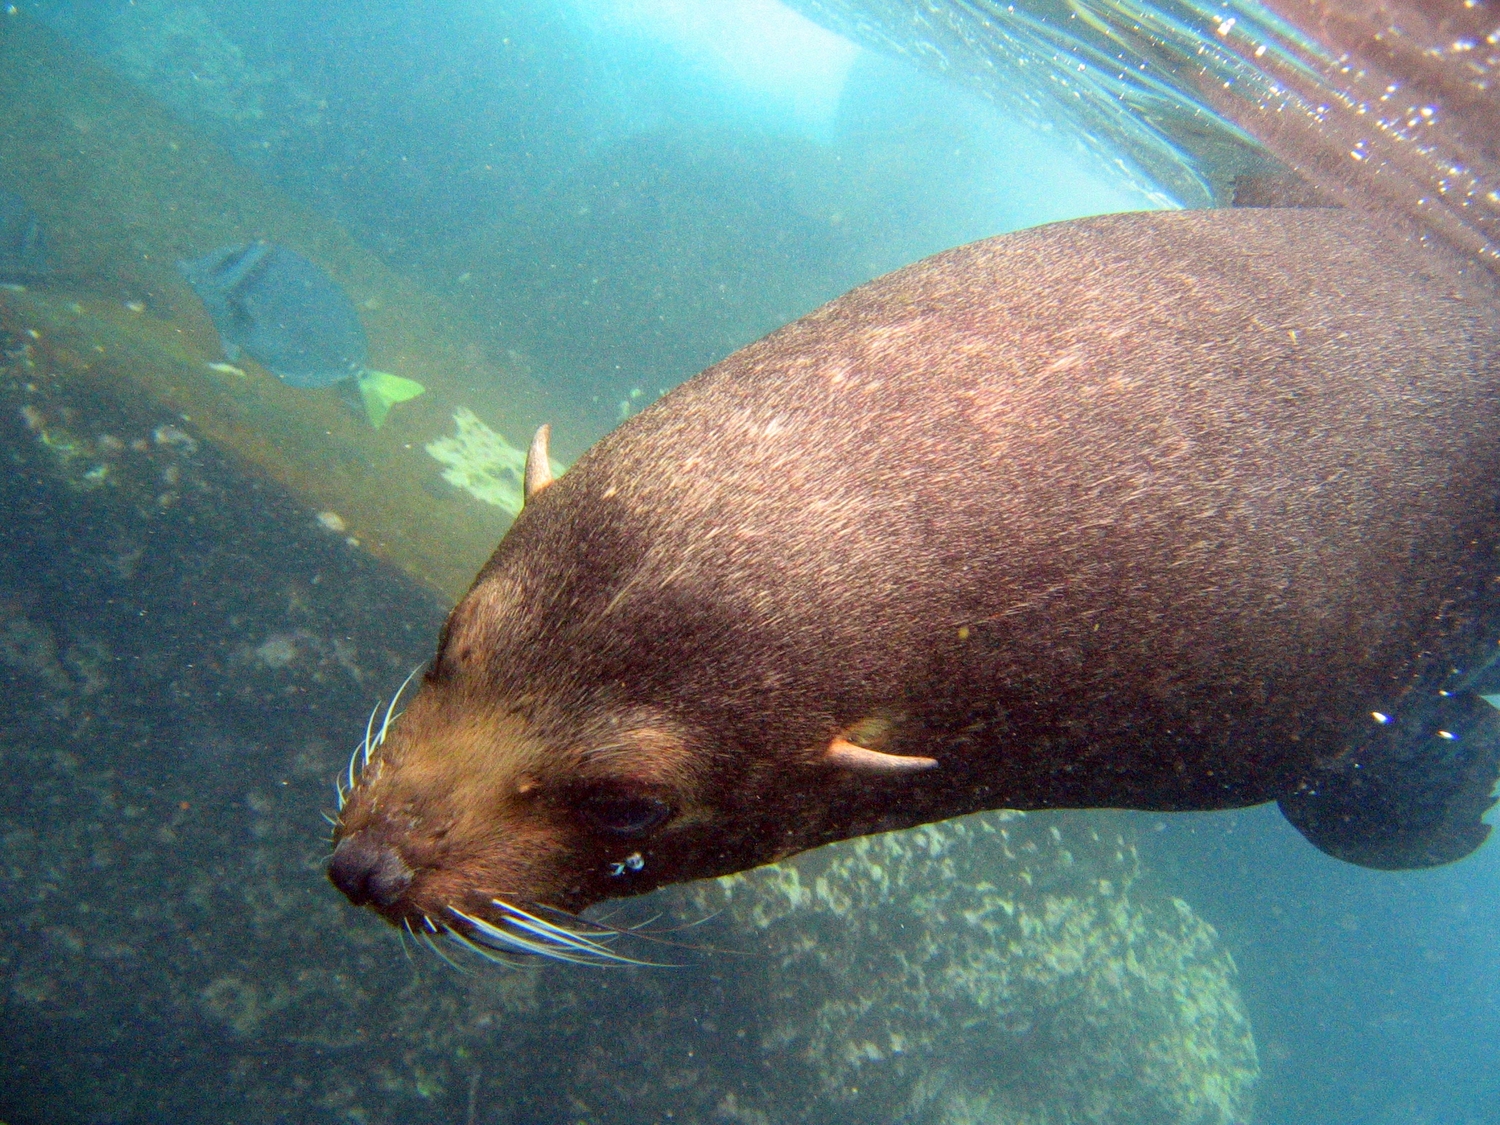 What's the Difference Between Seals and Sea Lions?